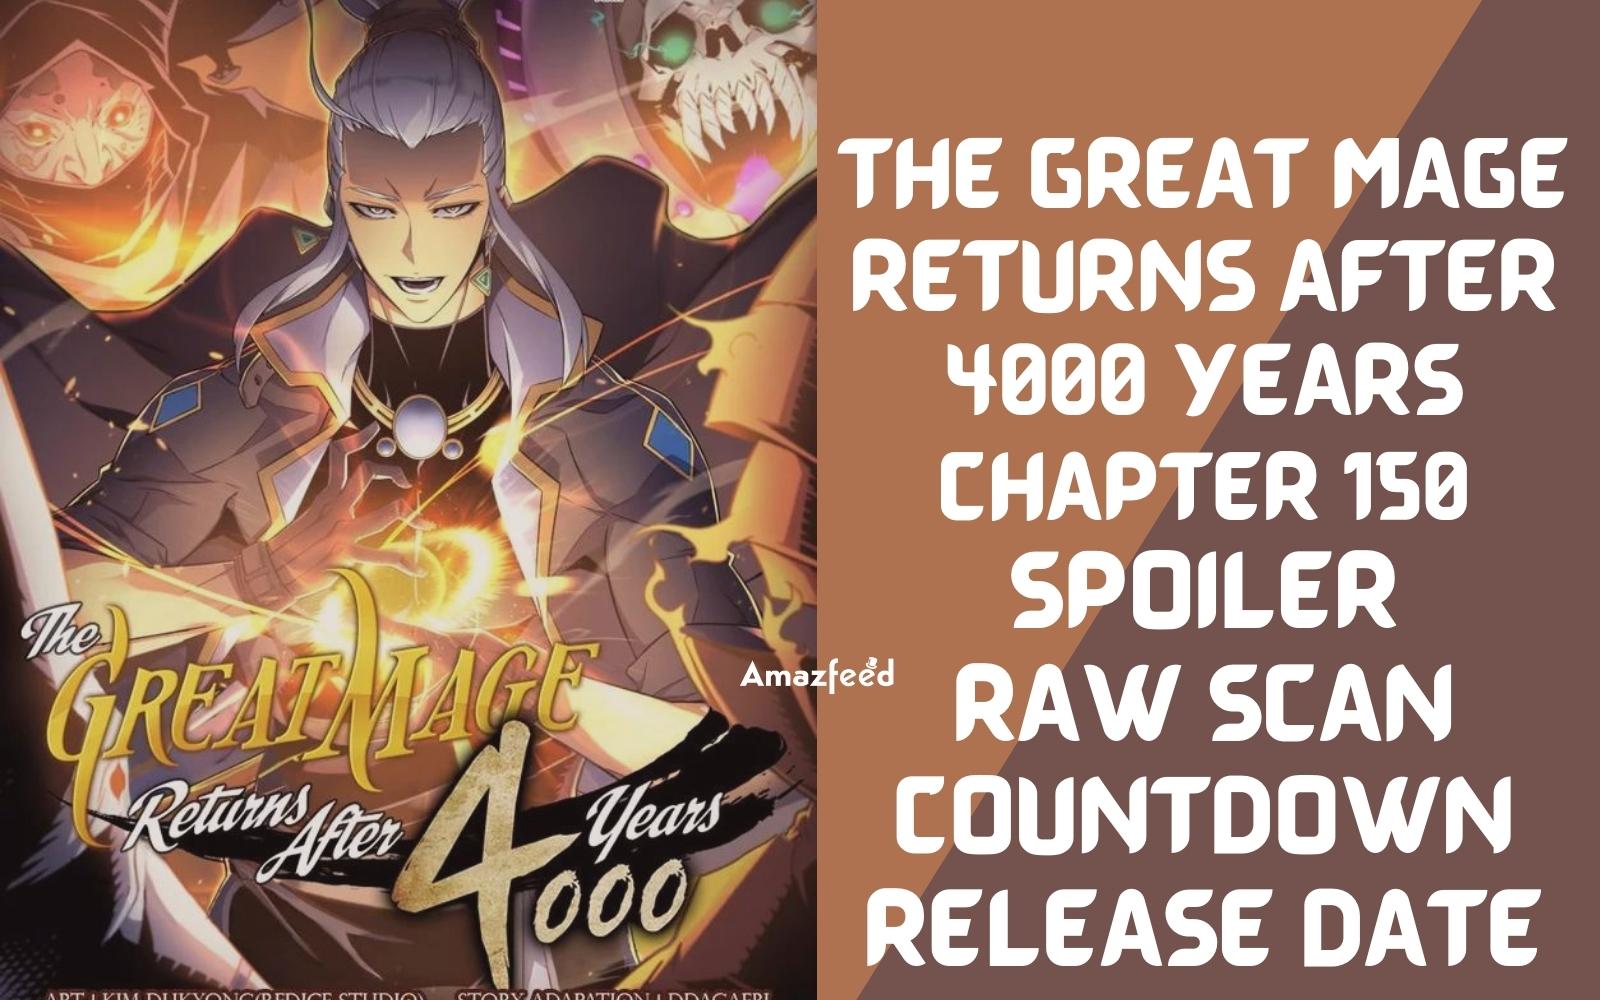 The Greatest Estate Developer Chapter 107 Reddit Spoilers, Raw Scan,  Release Date, Countdown & Where To Read? » Amazfeed